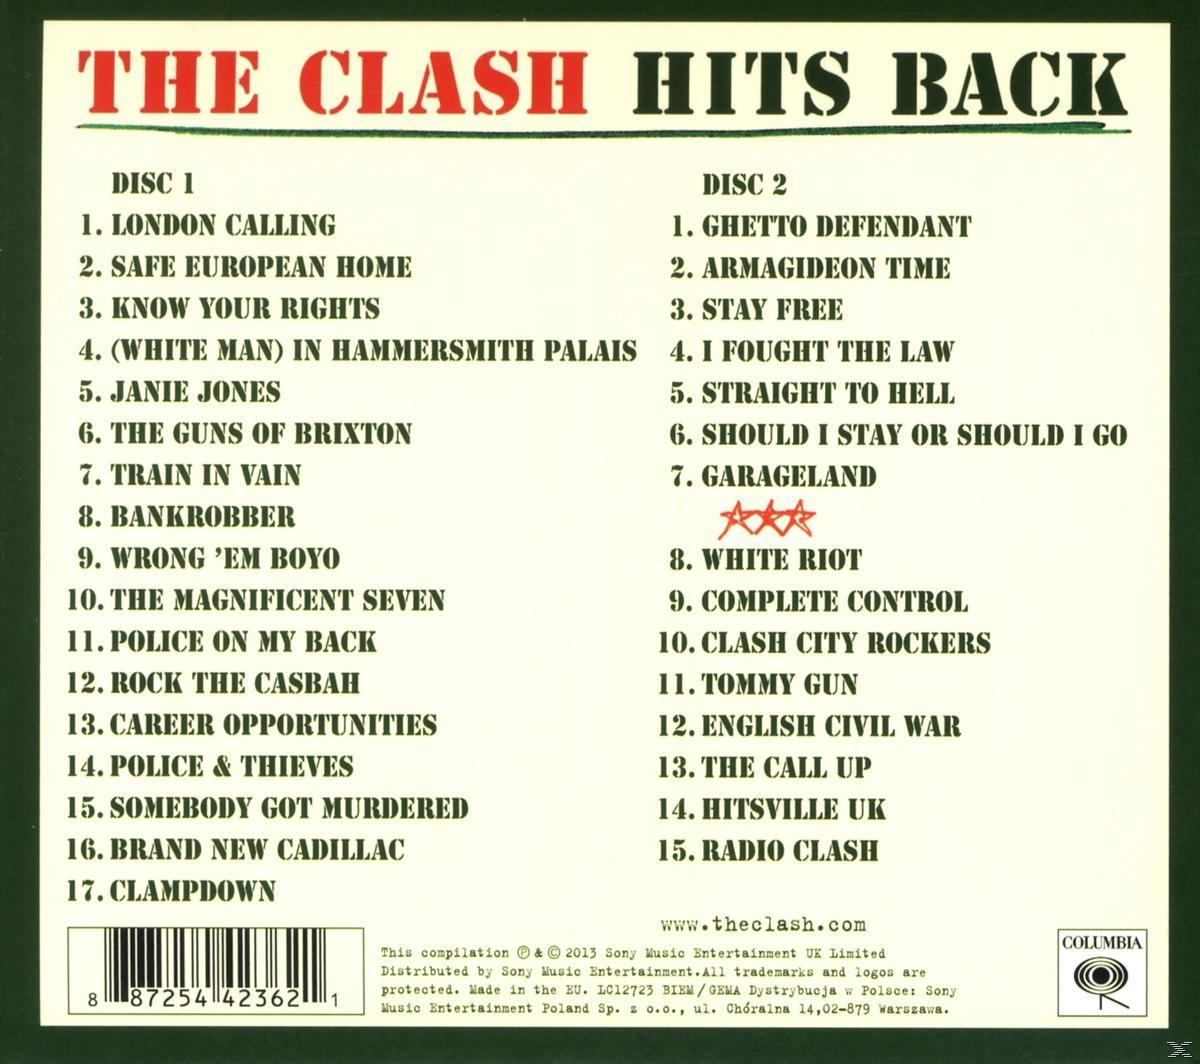 The Clash - The Clash (CD) Hits - Back